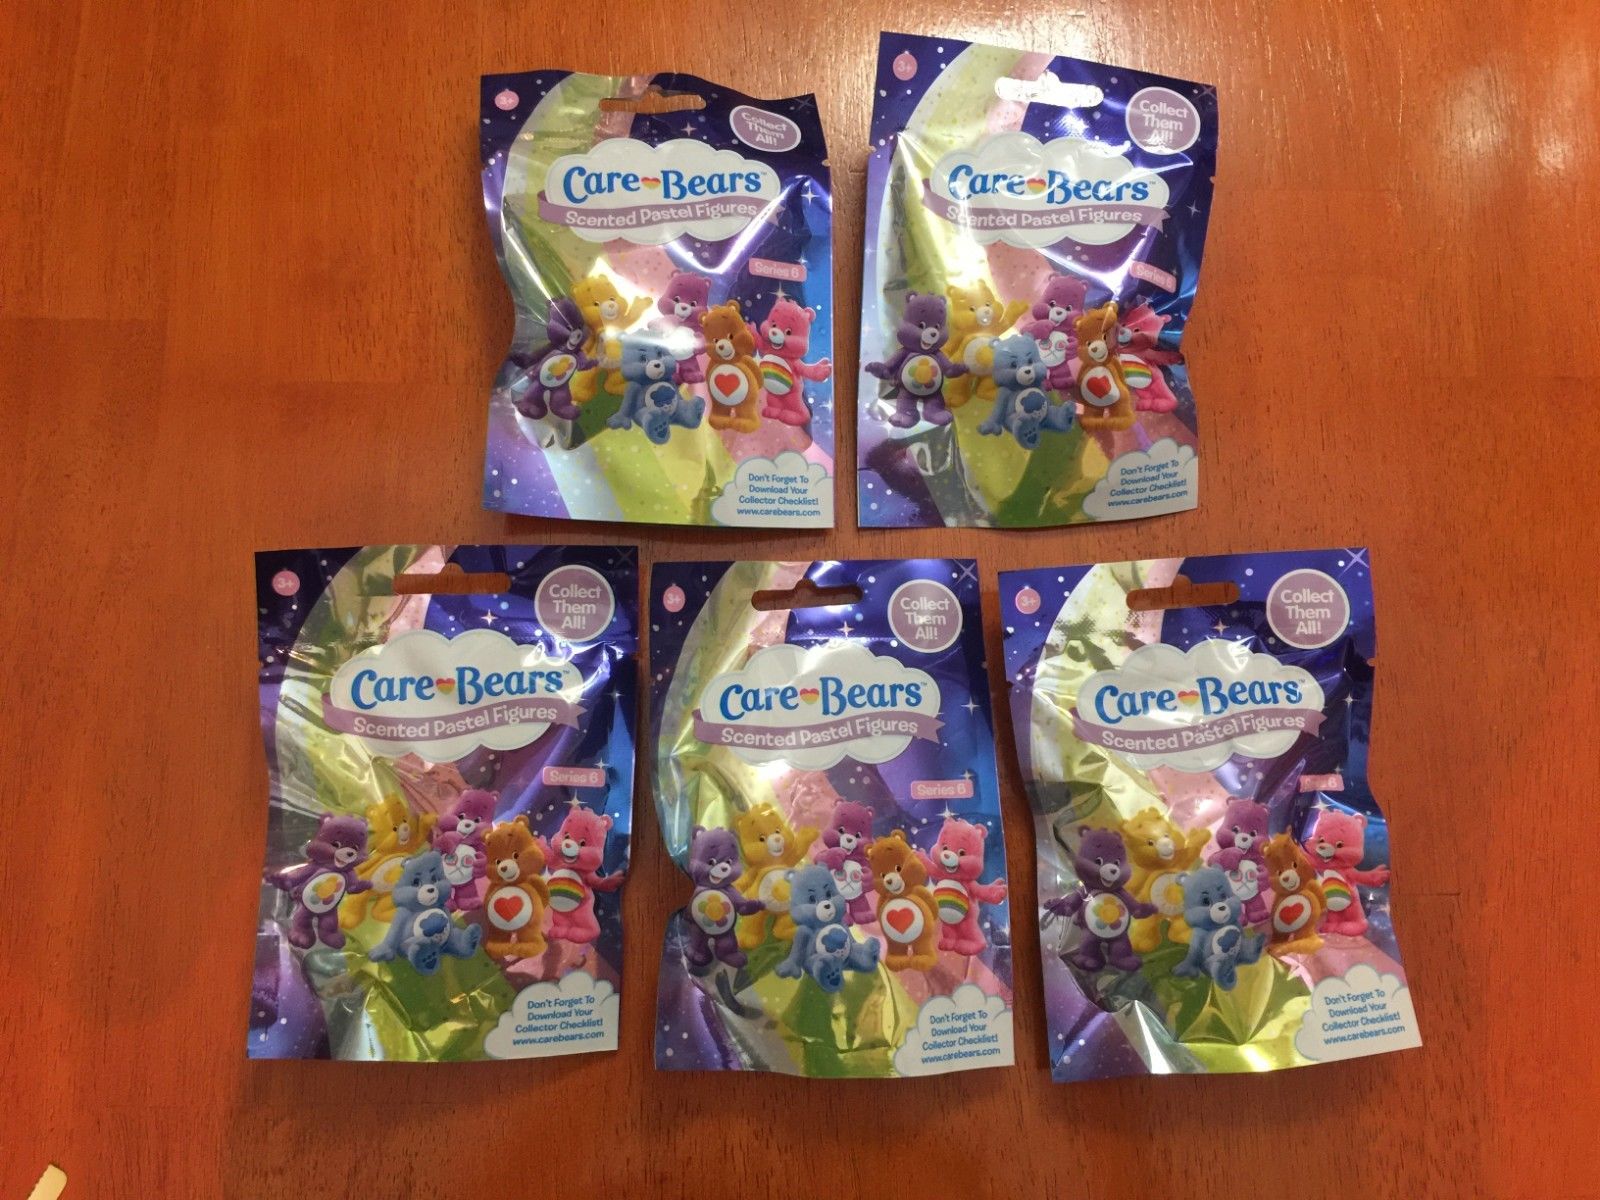 Care Bears Series 6 Blind Bags Scented Pastel Figures Lot of 5 NO DUPLICATES